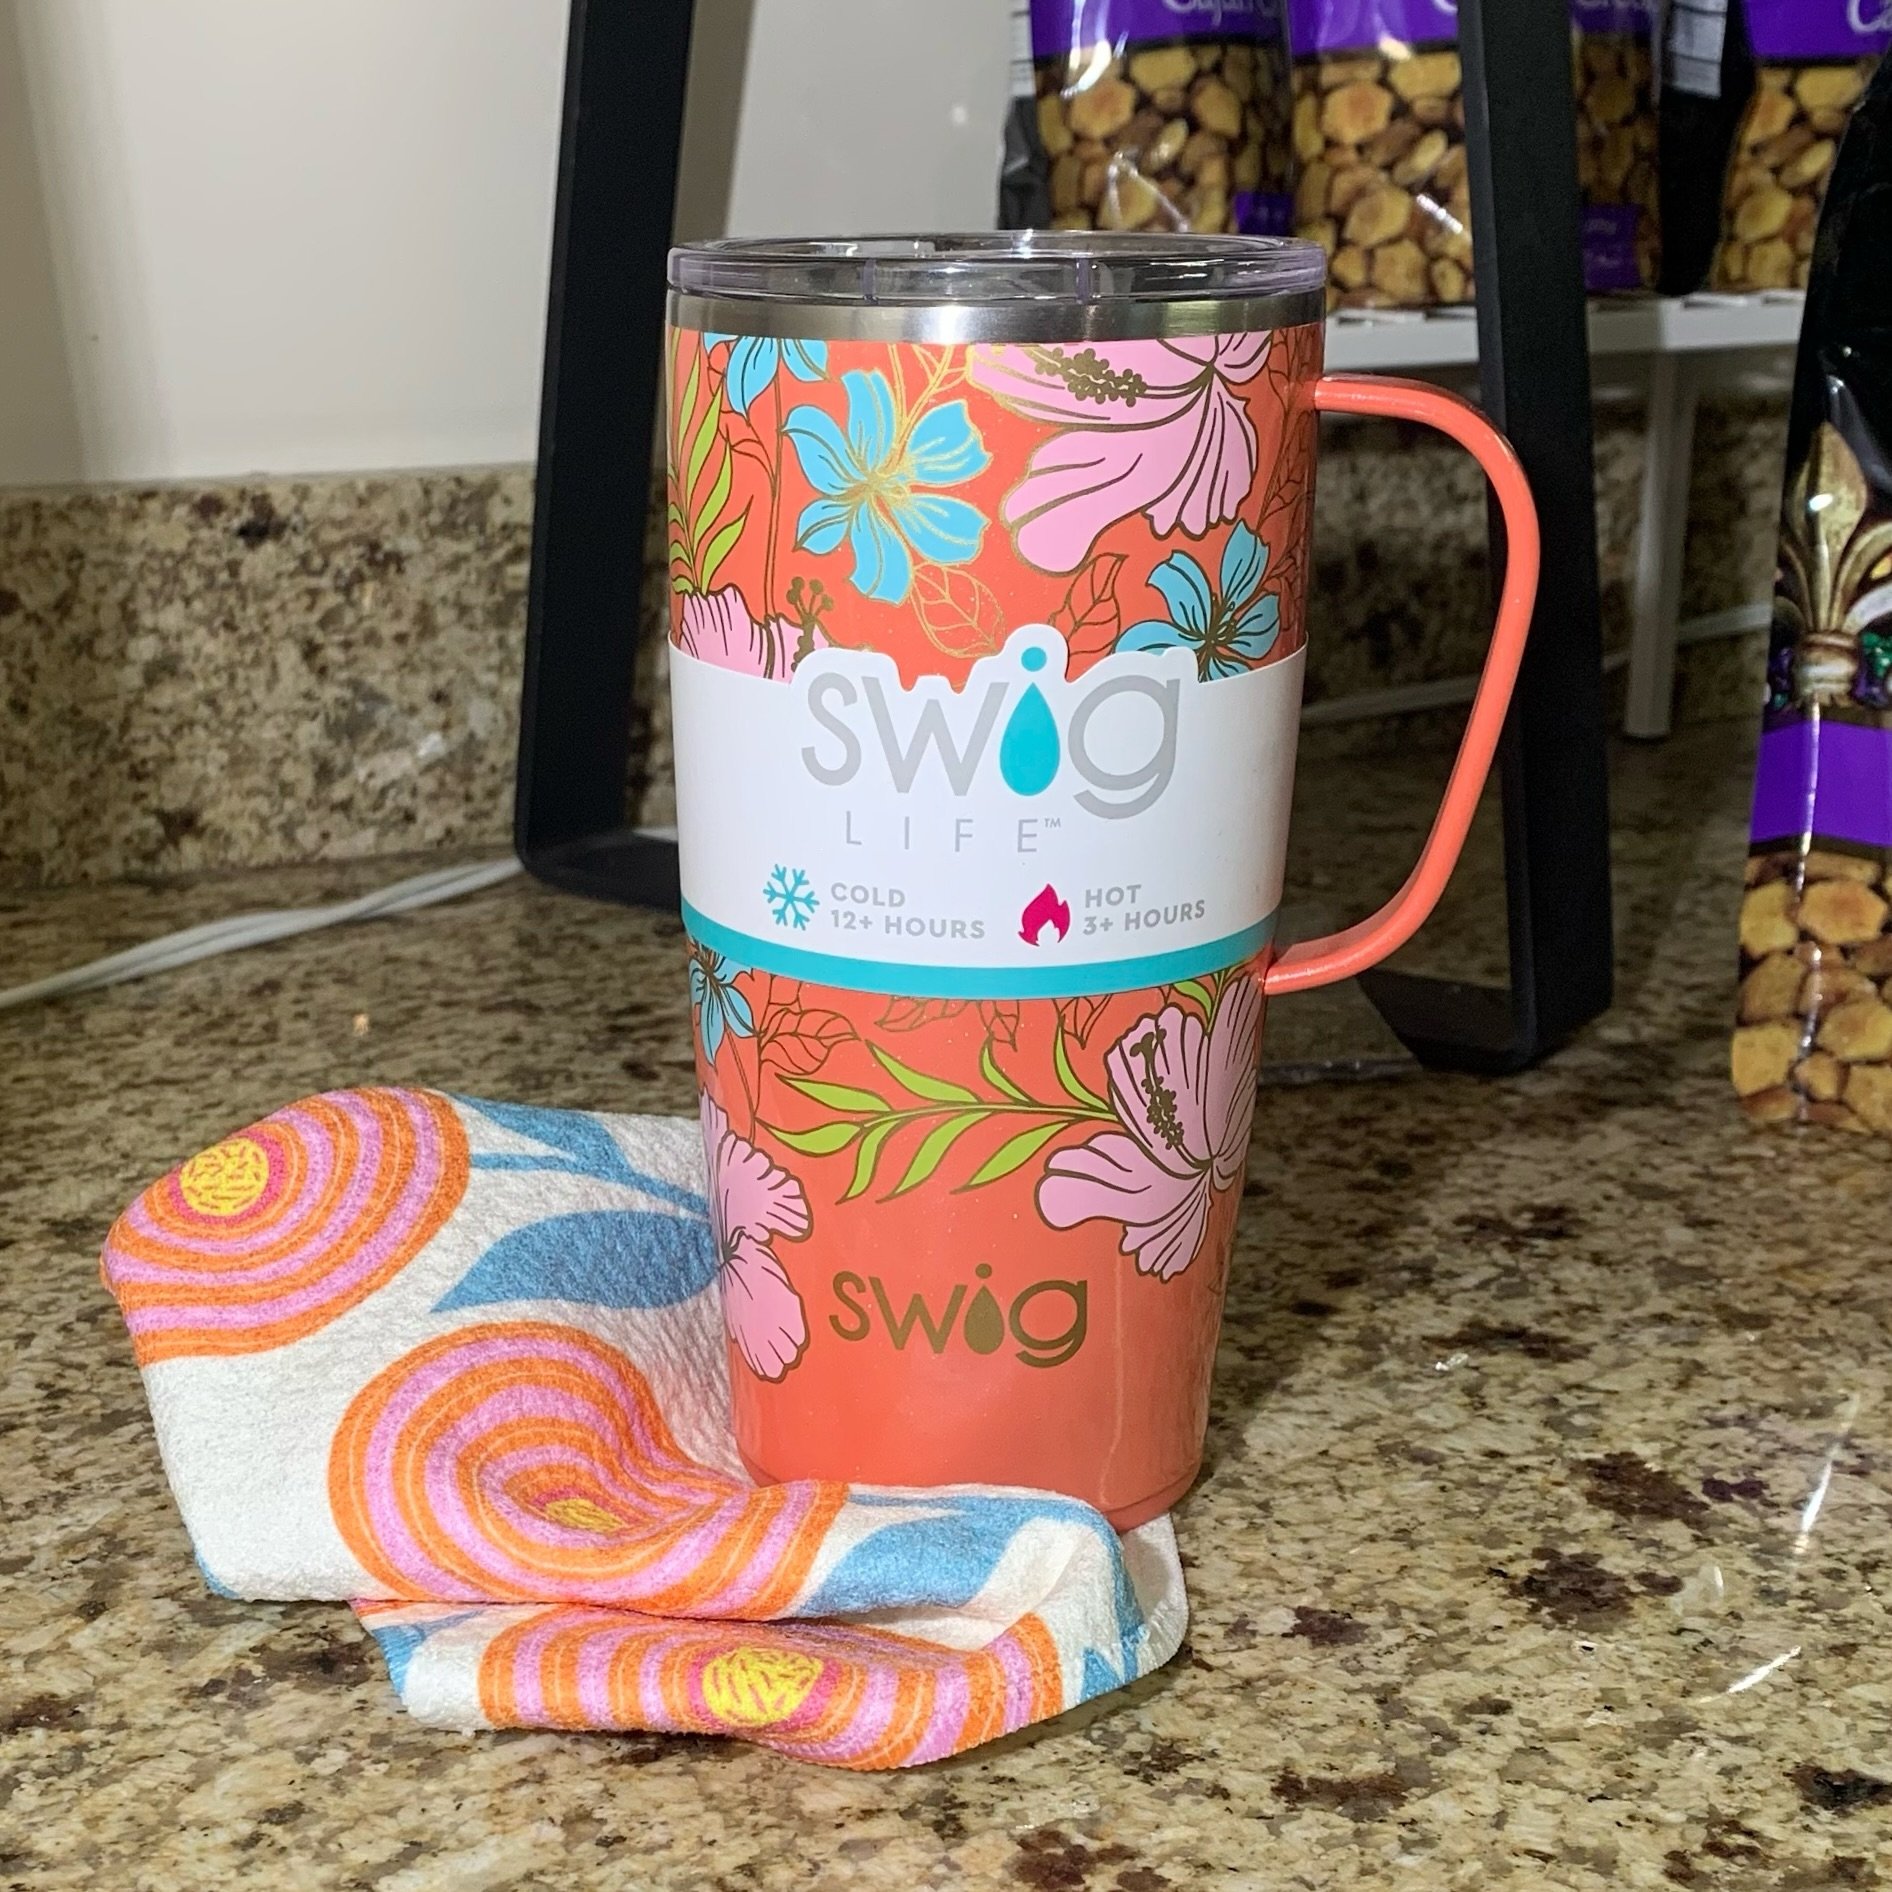 Teacher gift, nurse gift, mom gift! Who wouldn&rsquo;t love this?!?? 

Give the best gift, host the best gathering, have the most fun.
🏬Shop in Store: 321 Broadway, Paducah, KY
📞Call to order: 270.534.5951
📲Text a personal shopper: 859.379.4339
📧